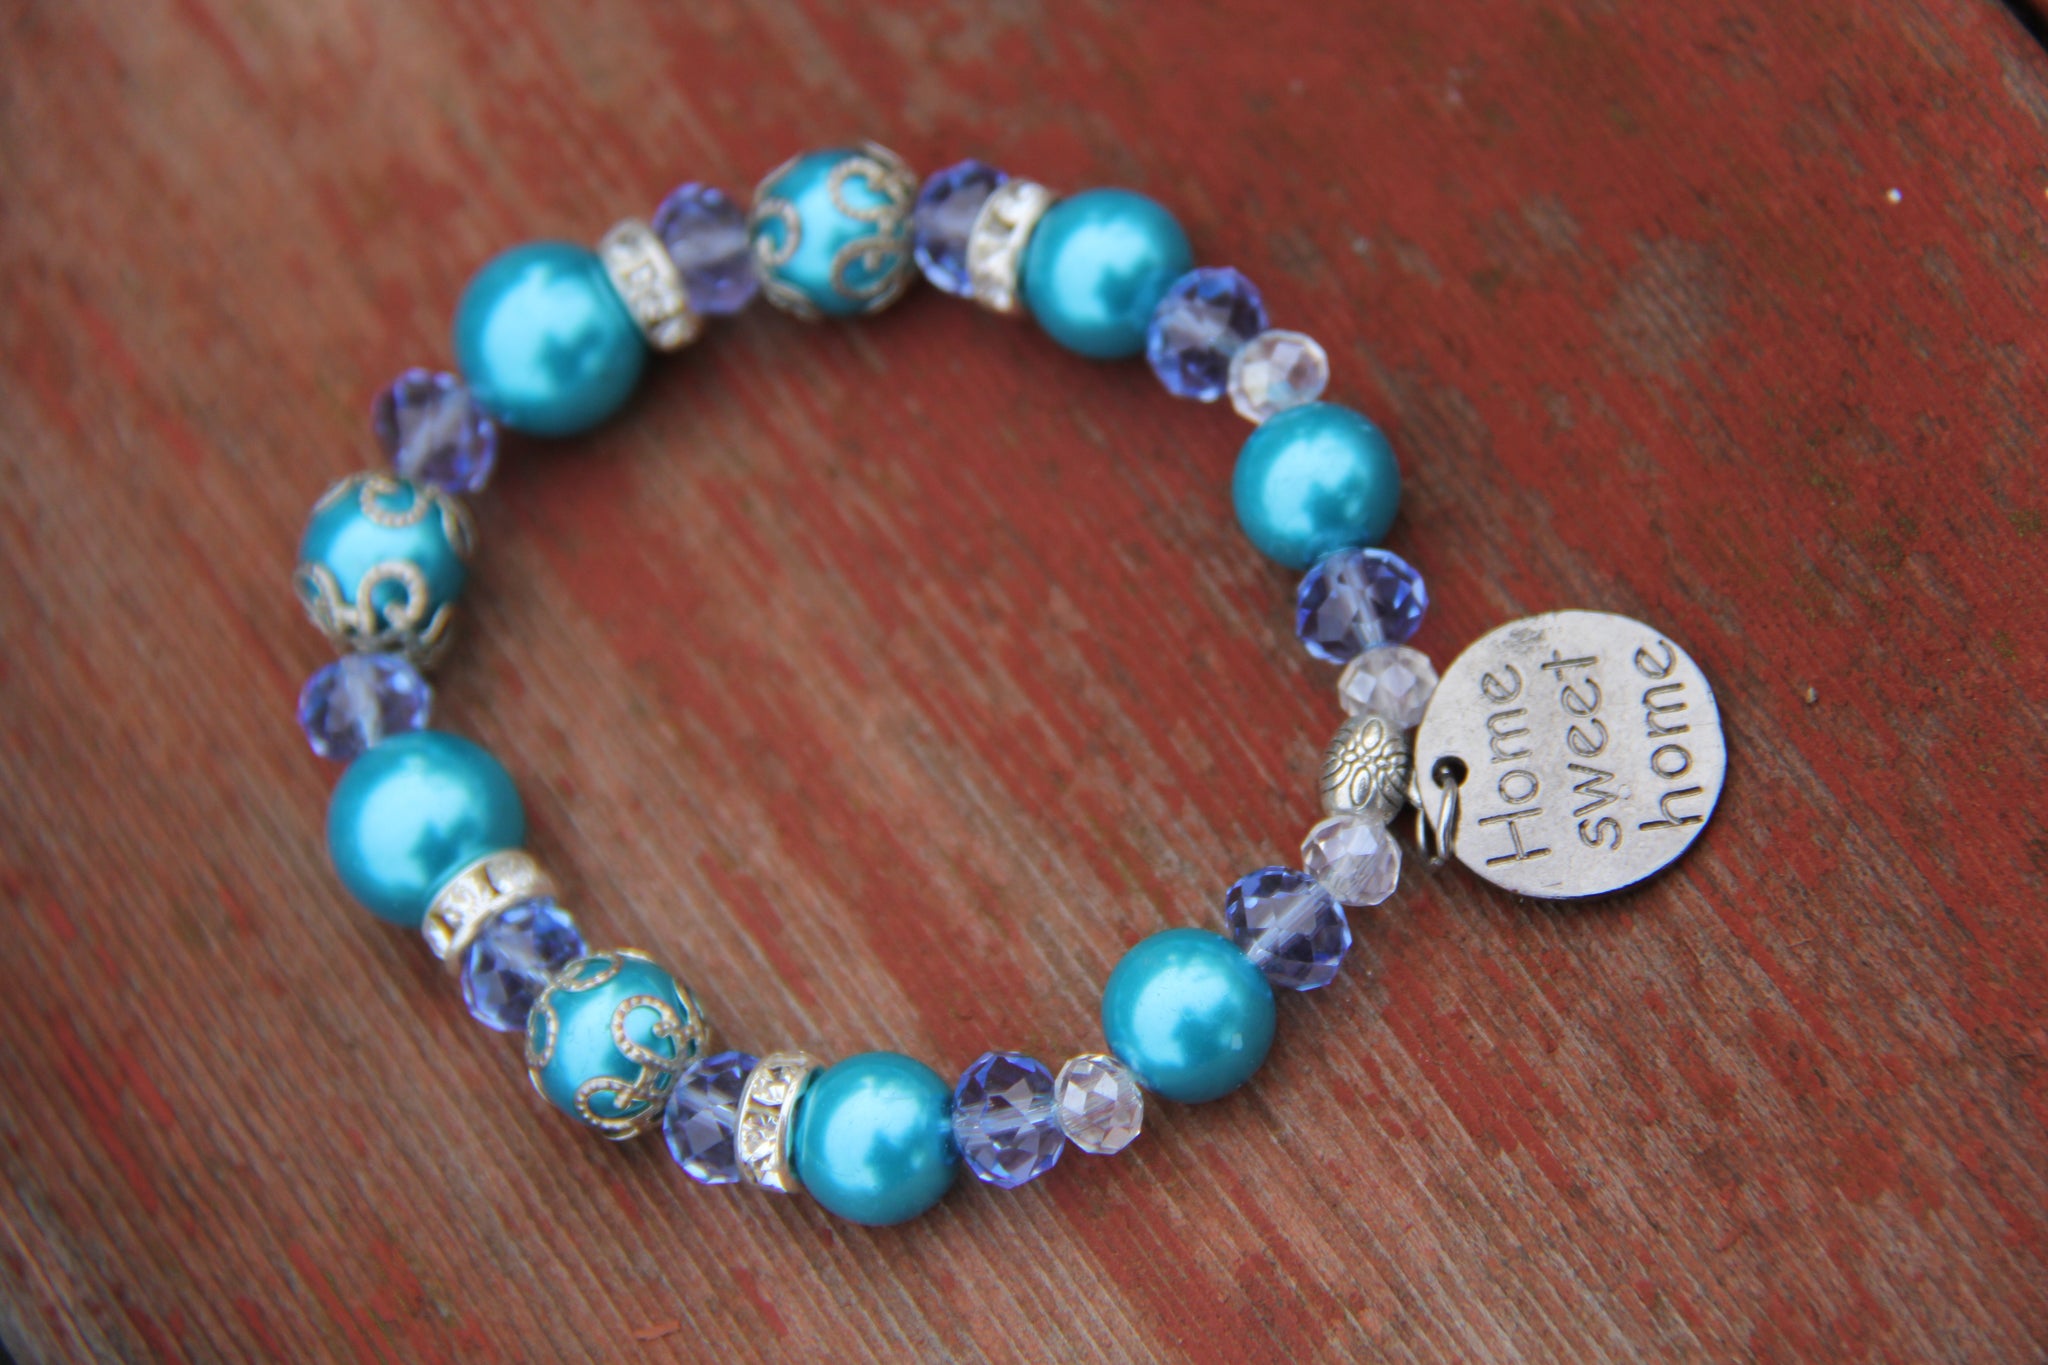 Turquoise and blue beads bottle bracelet with "Home sweet home" charm